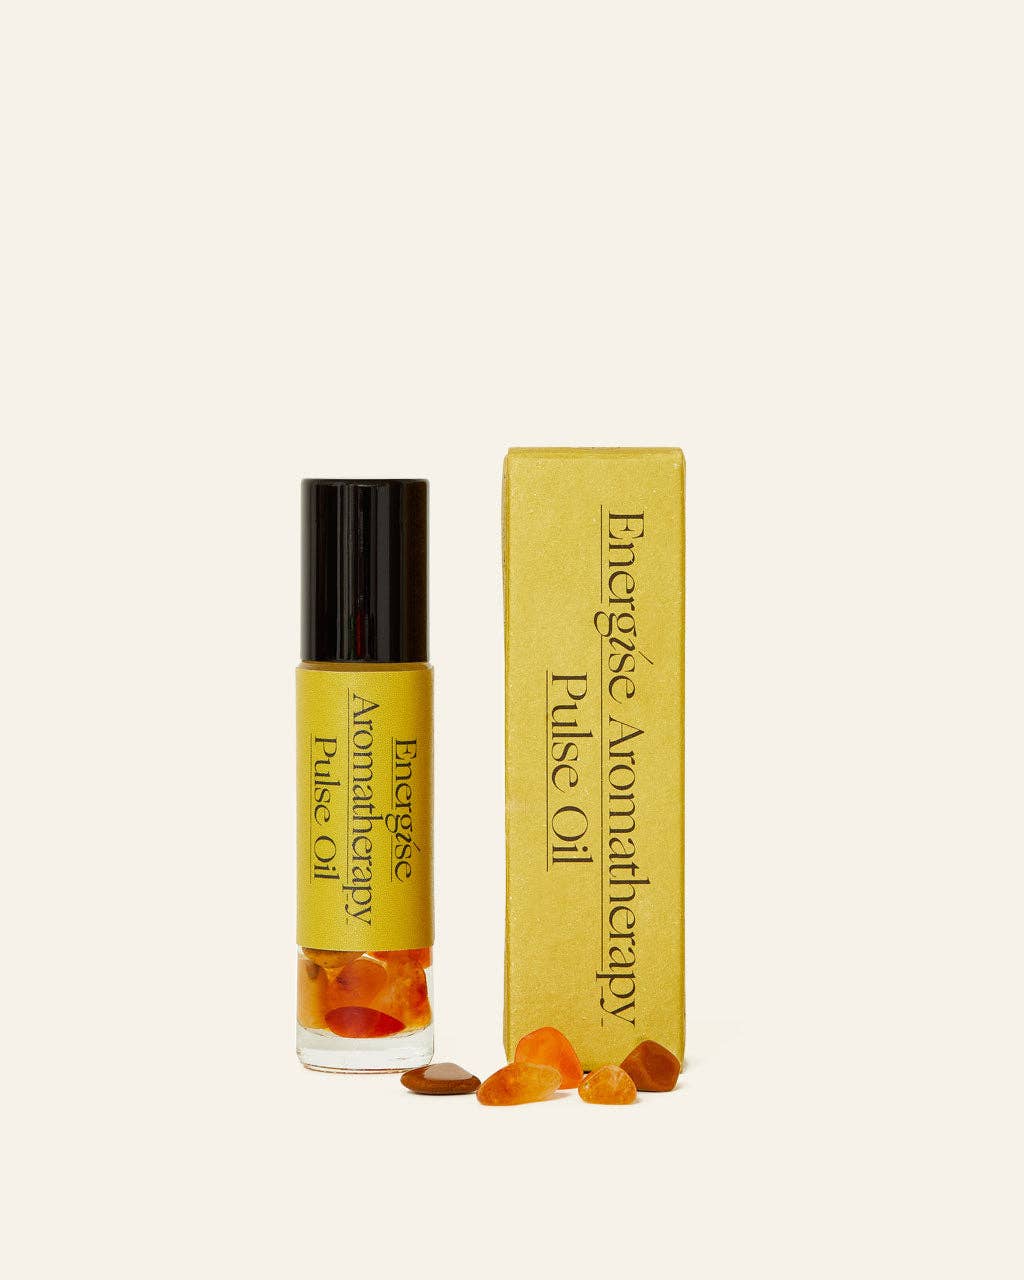 Aromatherapy Pulse Oil, Energise